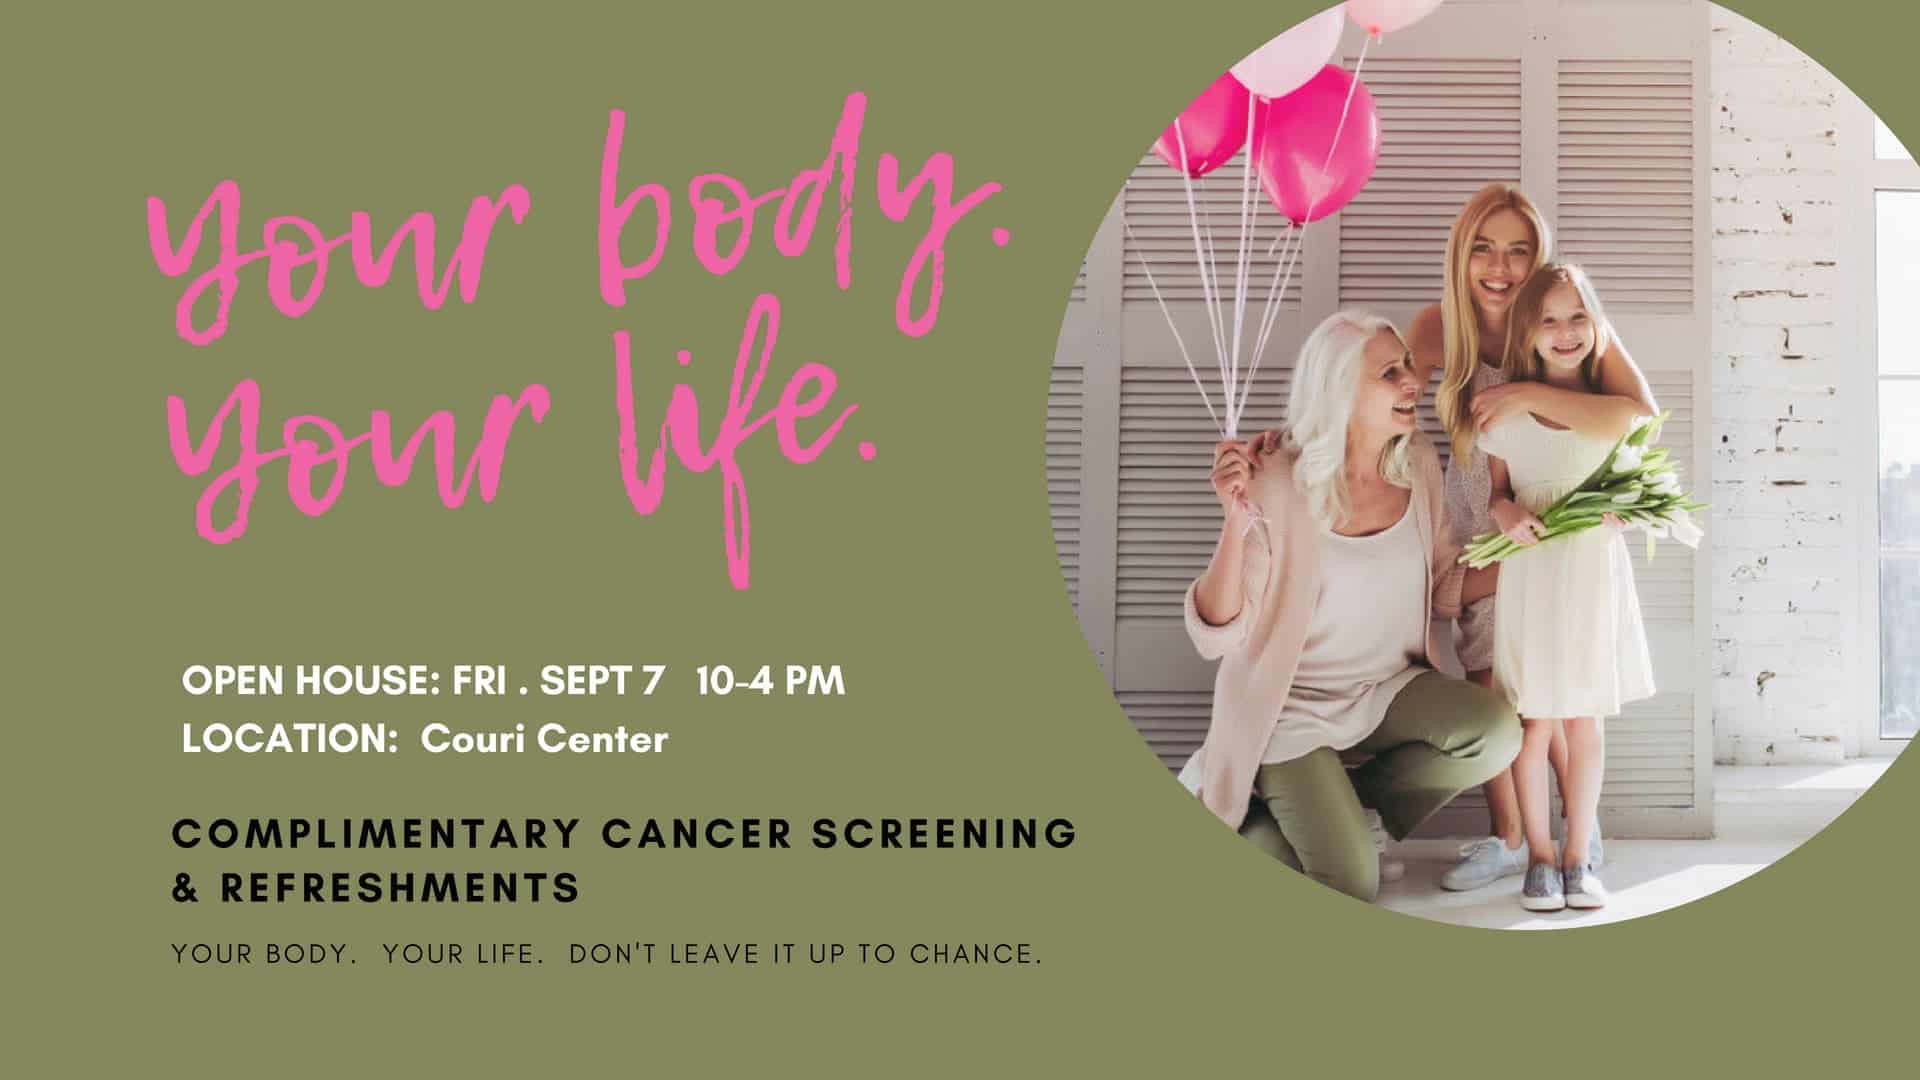 Complimentary Cancer Screening & Refreshments